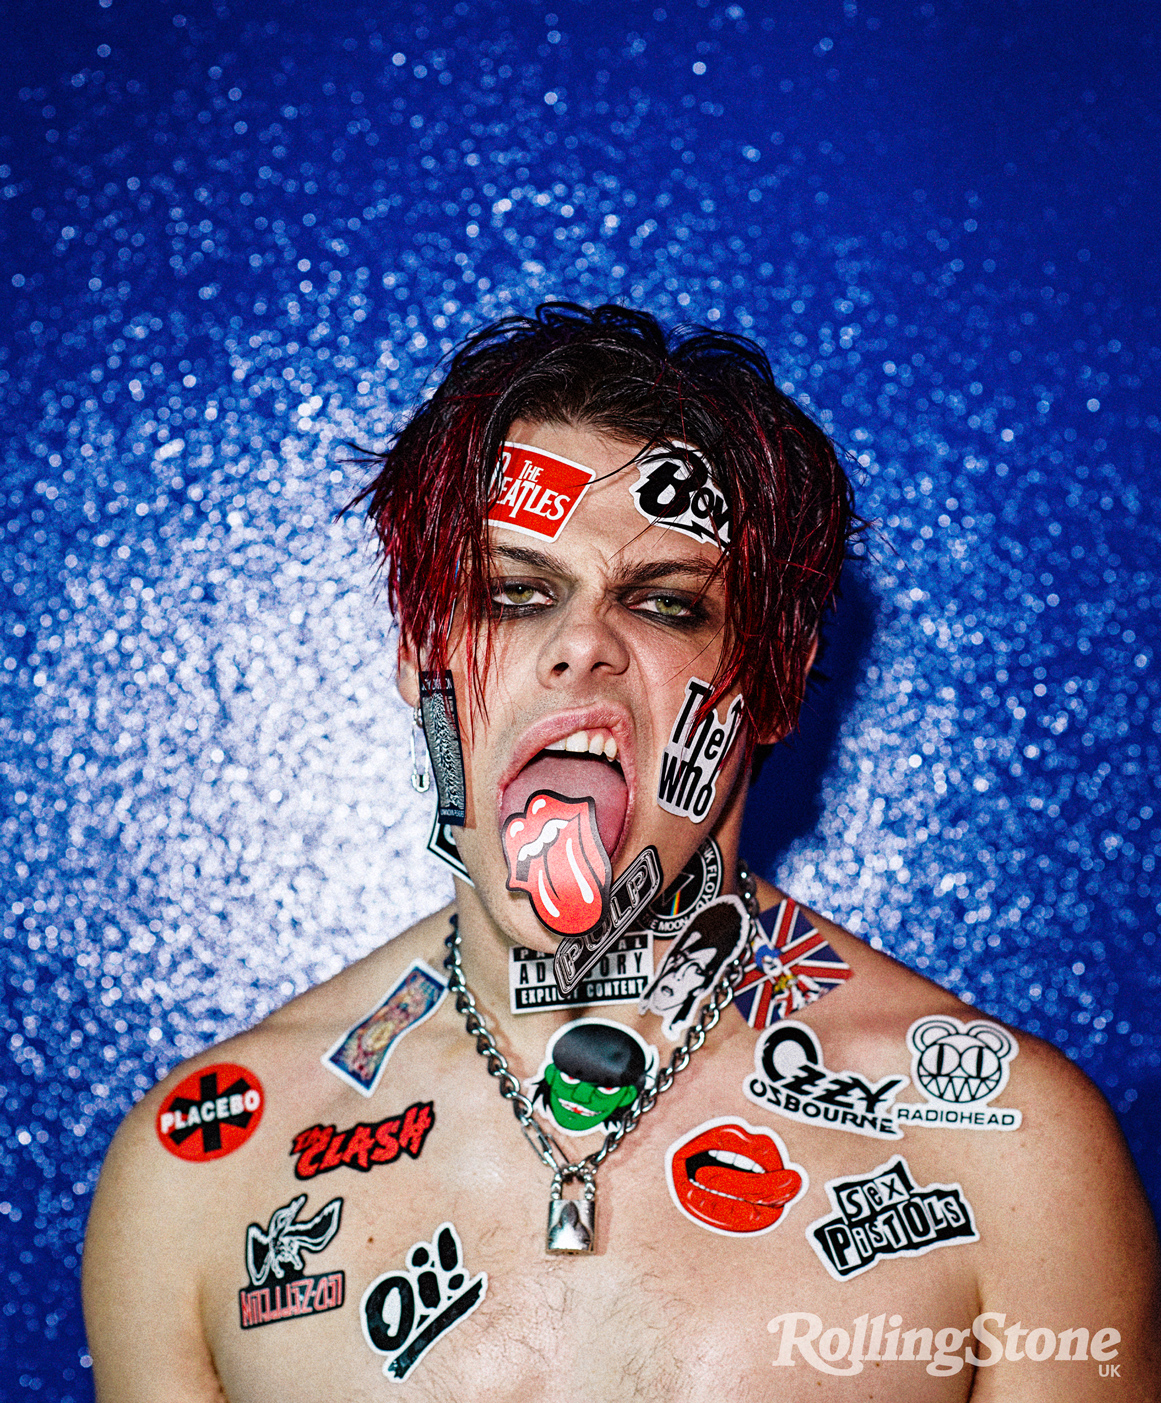 Yungblud photographed for Rolling Stone UK.